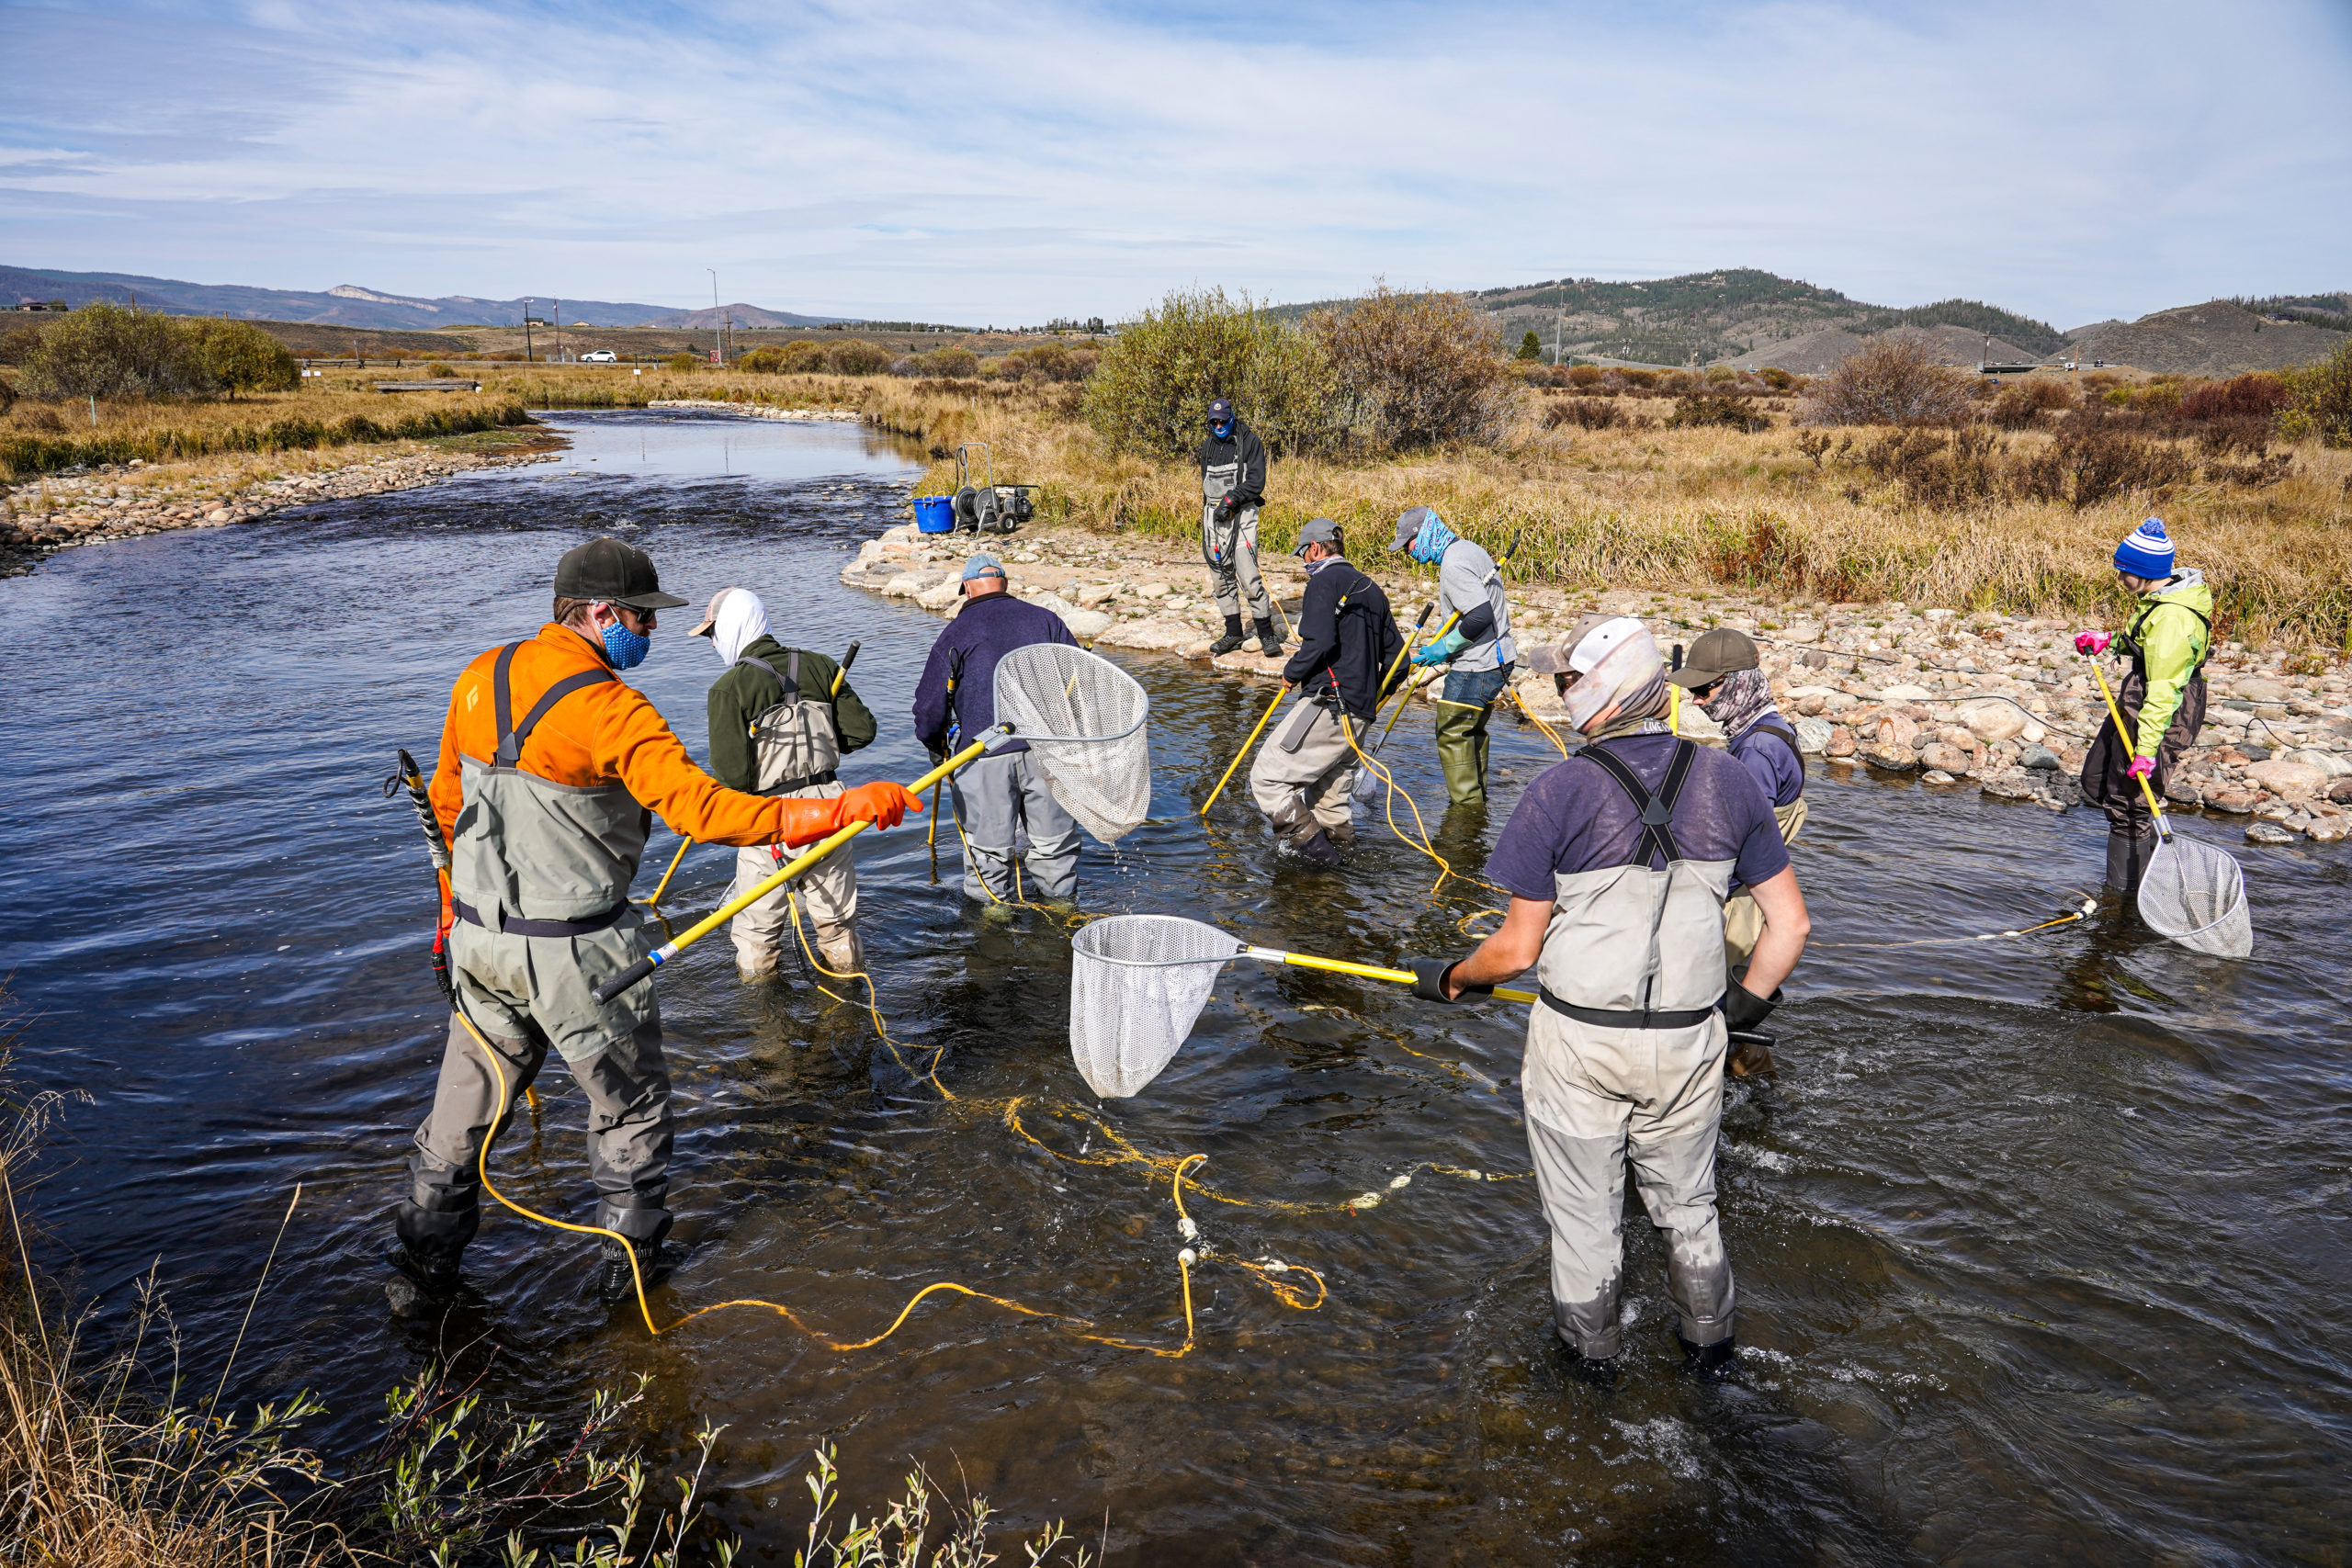 Colorado Parks and Wildlife conducts electro-fishing surveys on several rivers and streams in Grand County to check on fish health. The surveys are done at the same time and location each year to monitor trends. Photo credit: Denver Water.